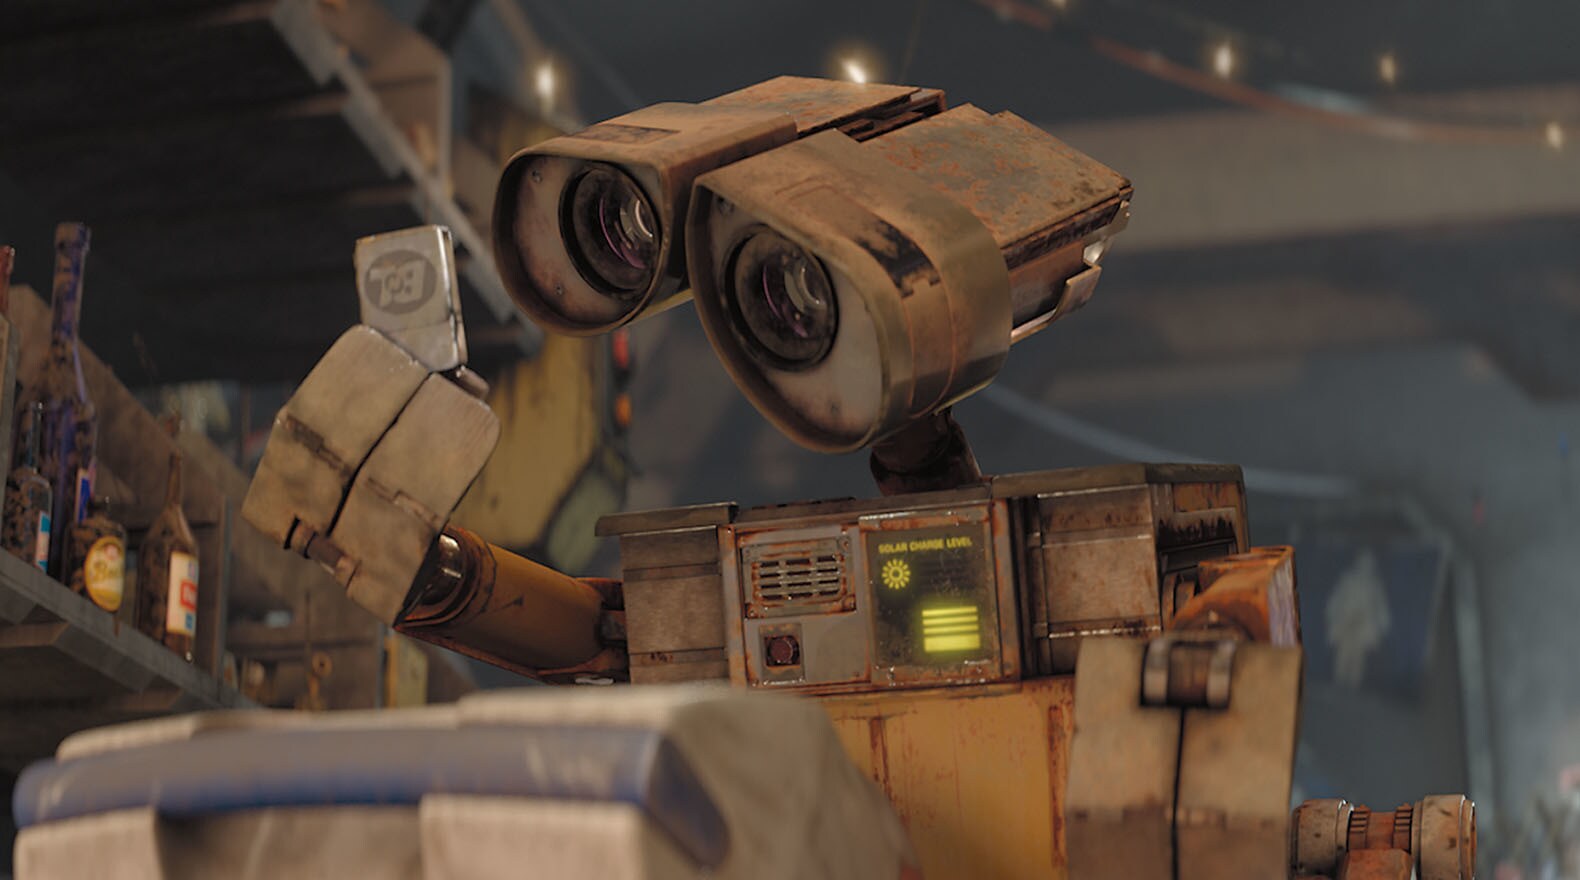 WALL•E tries to understand what the world was like long ago.